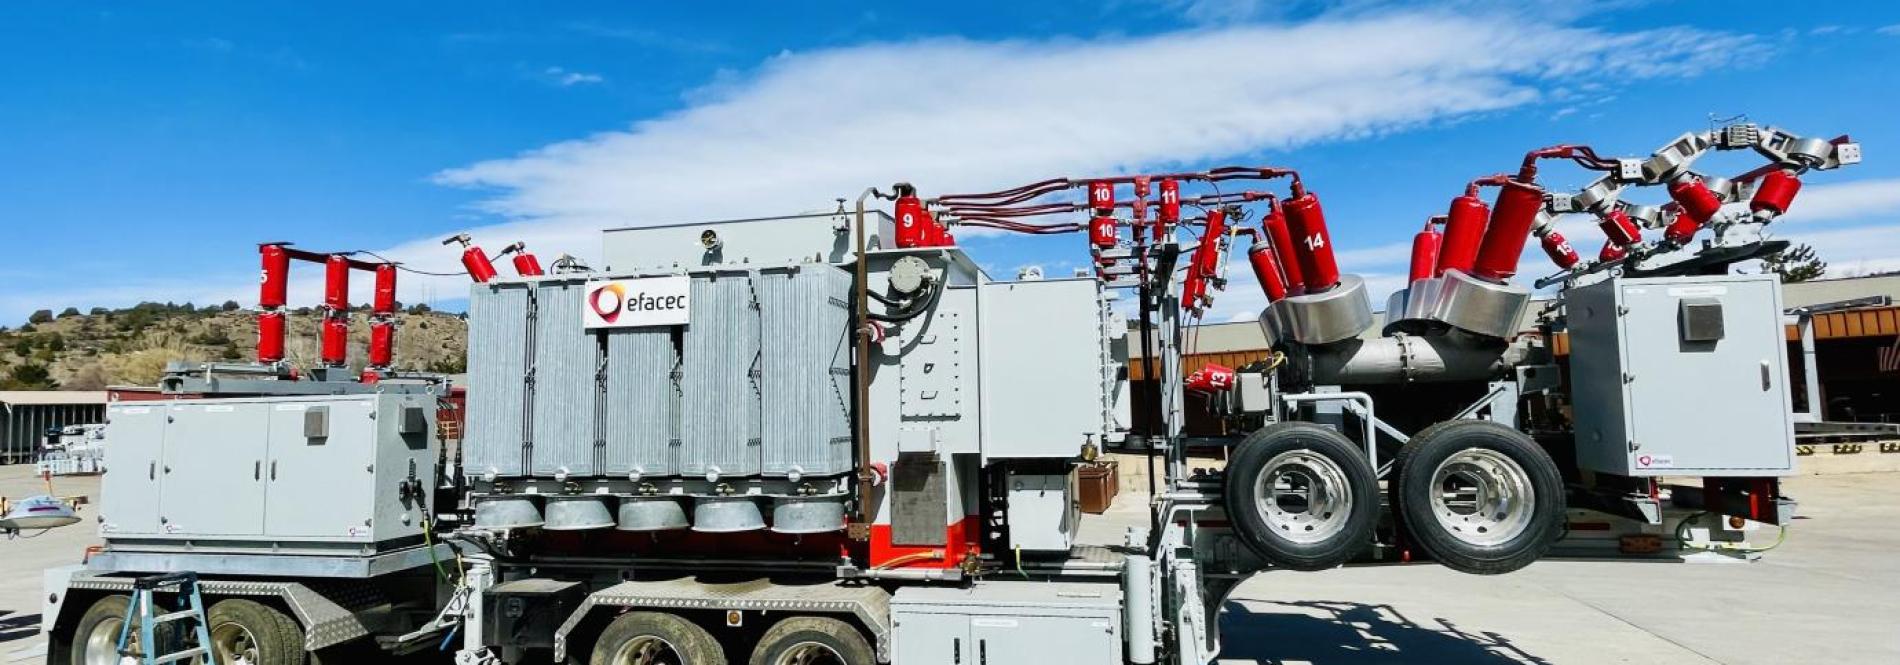 Mobile substation manufactured by efacec and owned by LPEA